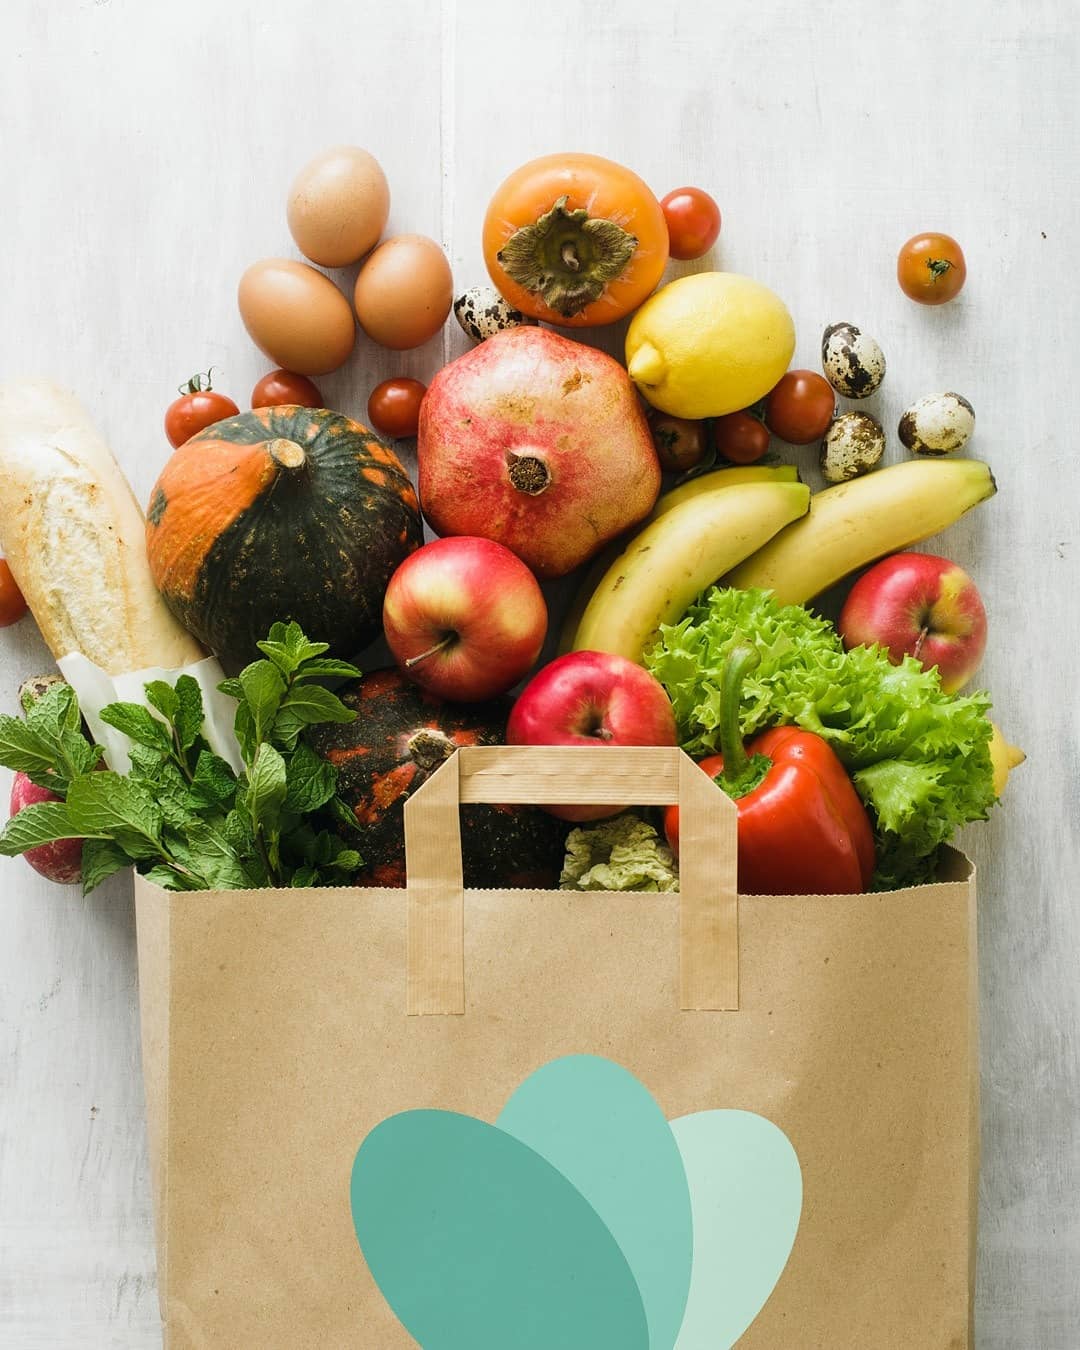 Explore our app to find and save Surprise Bags of food - Too Good To Go